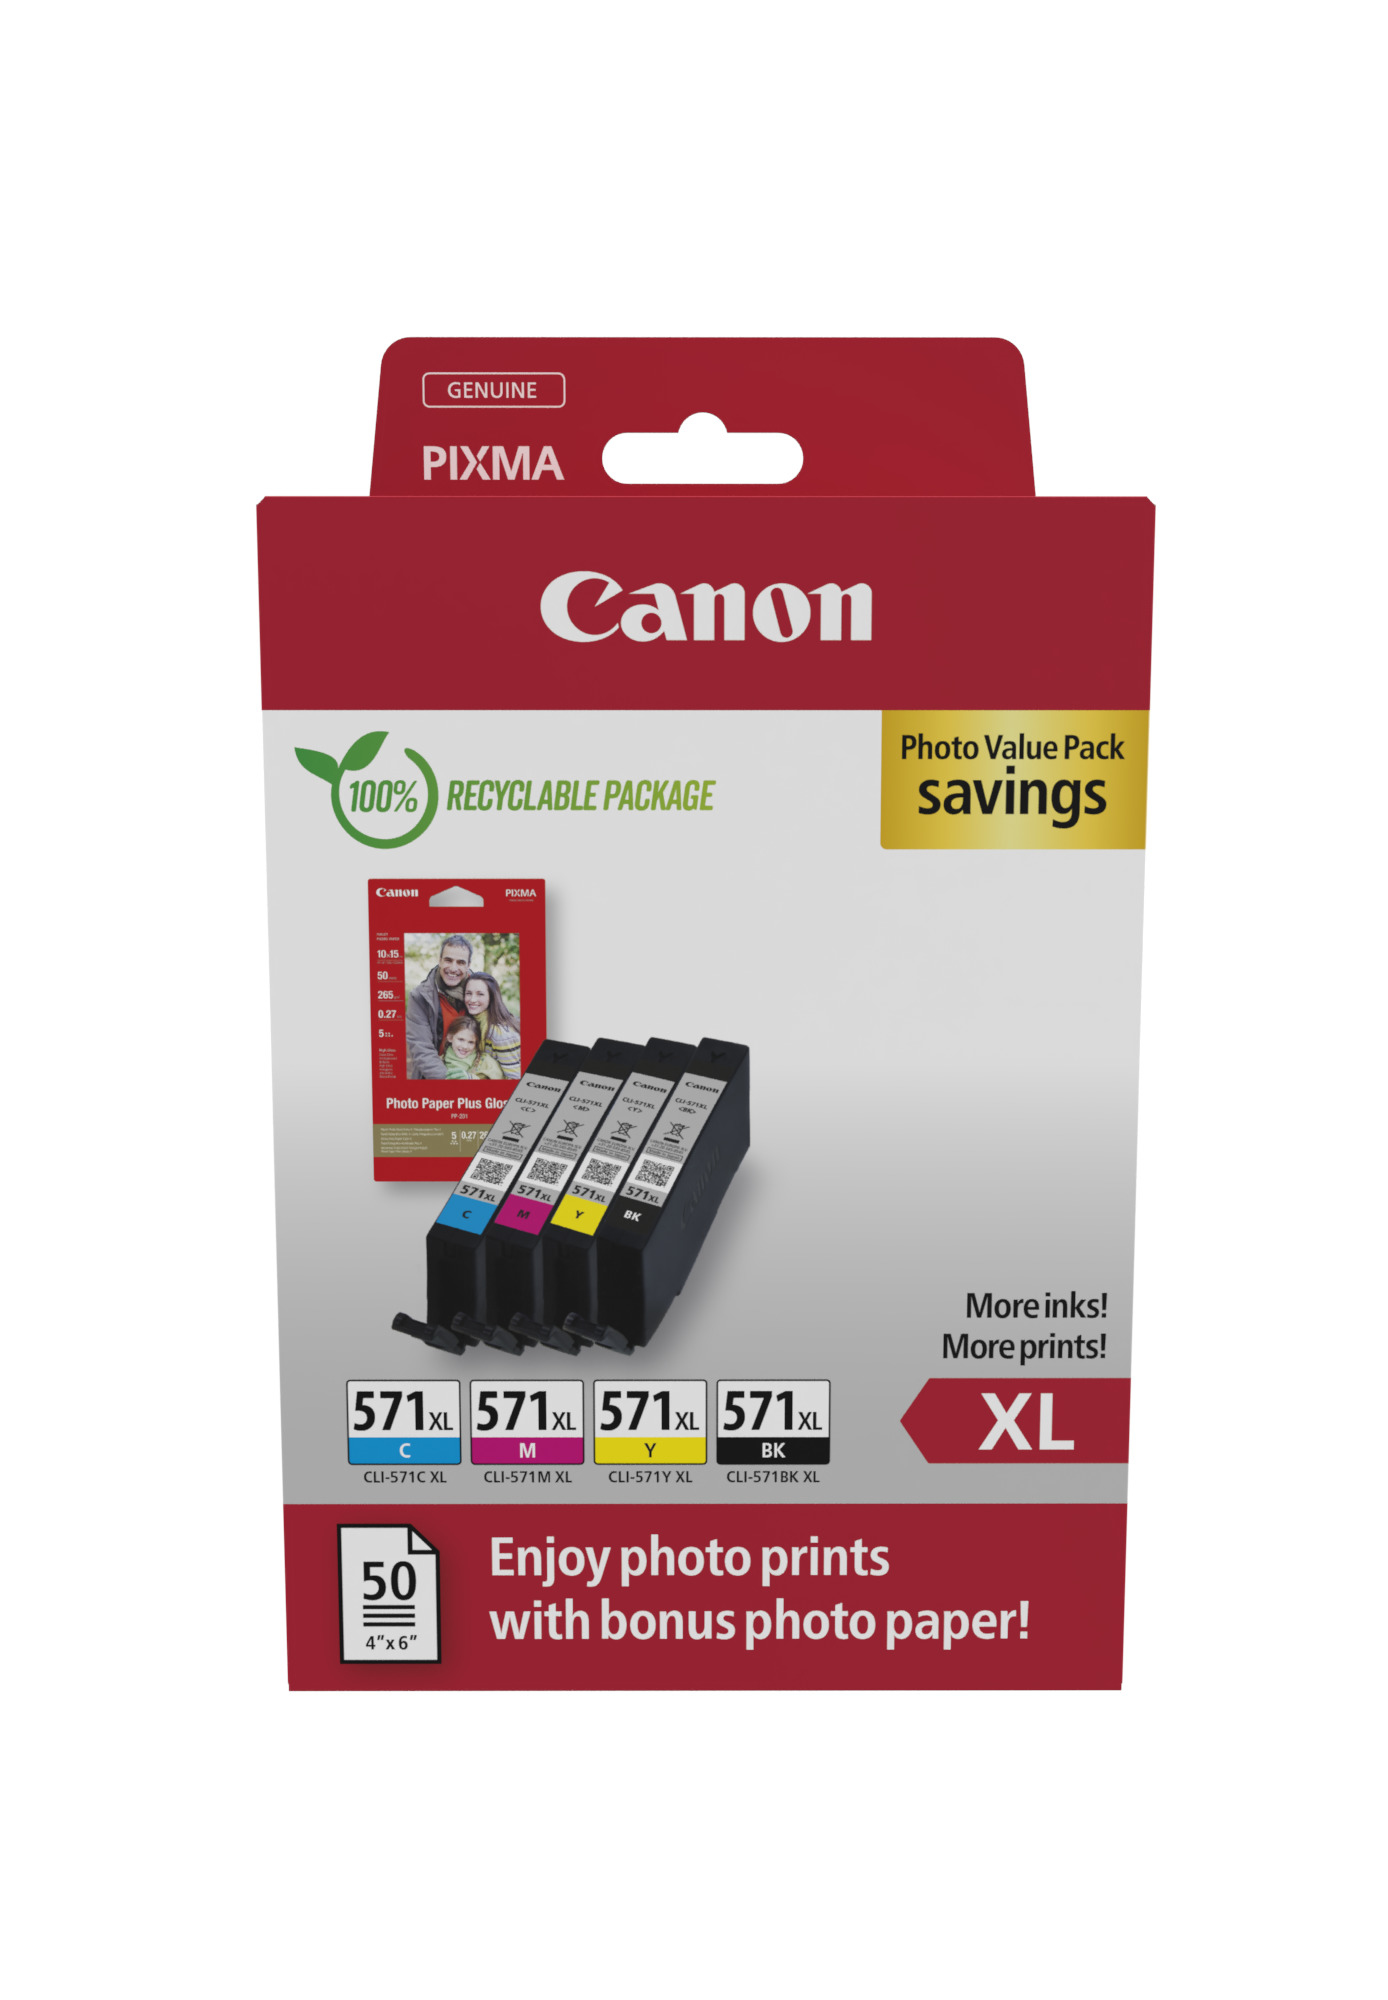 User manual Canon Pixma TS6051 (English - 448 pages)